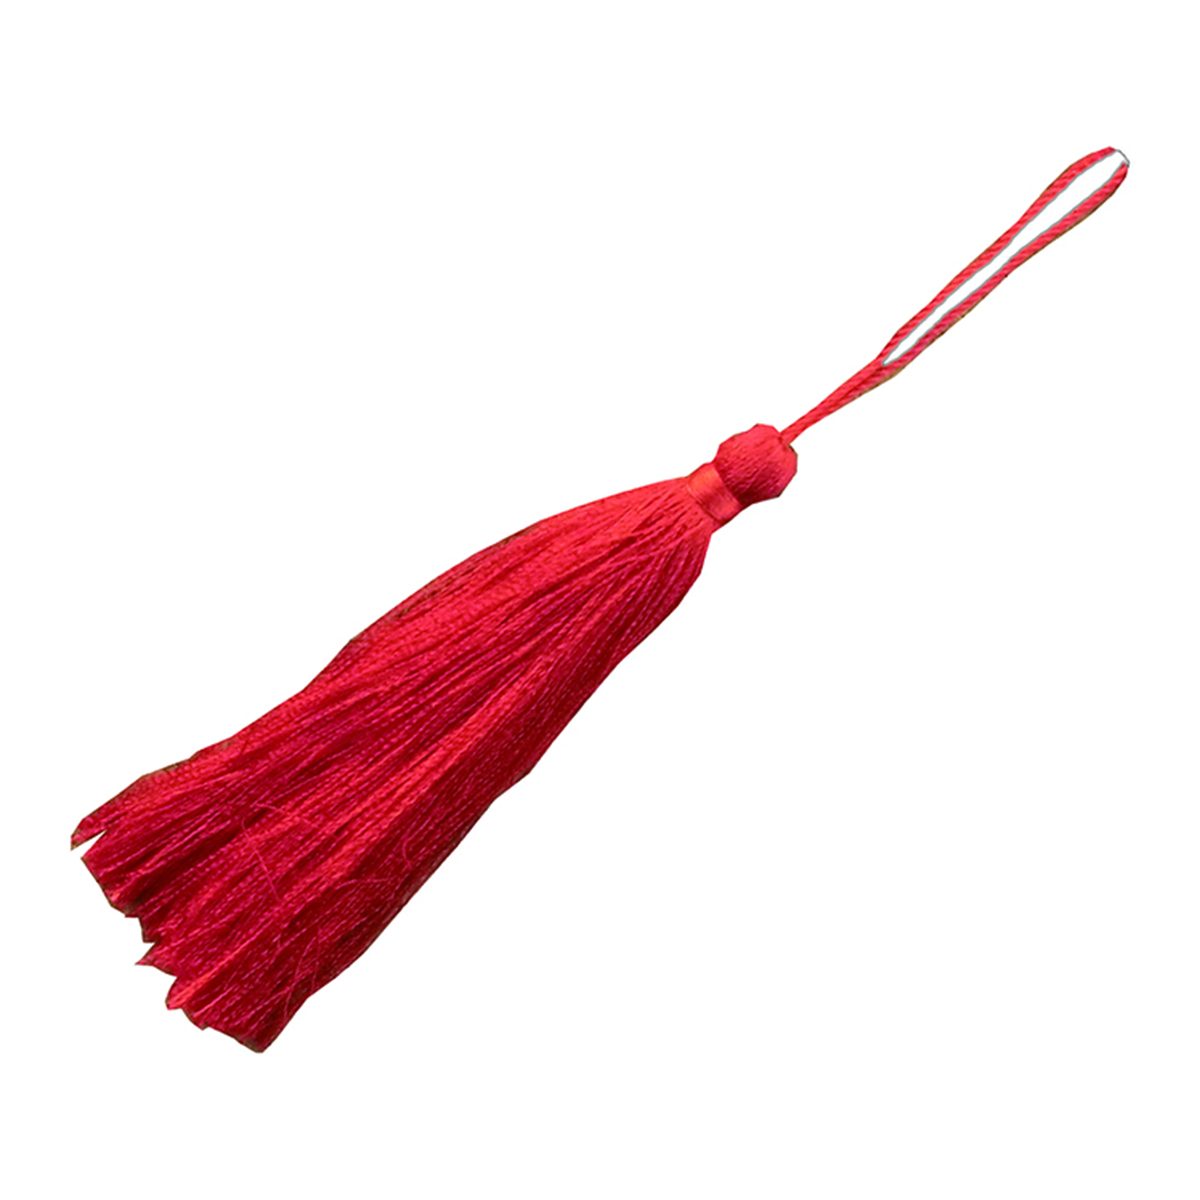 Tassel (large) 10 pieces red, made in Japan, Chikyuya, hanging decoration, accessory, auspicious decoration